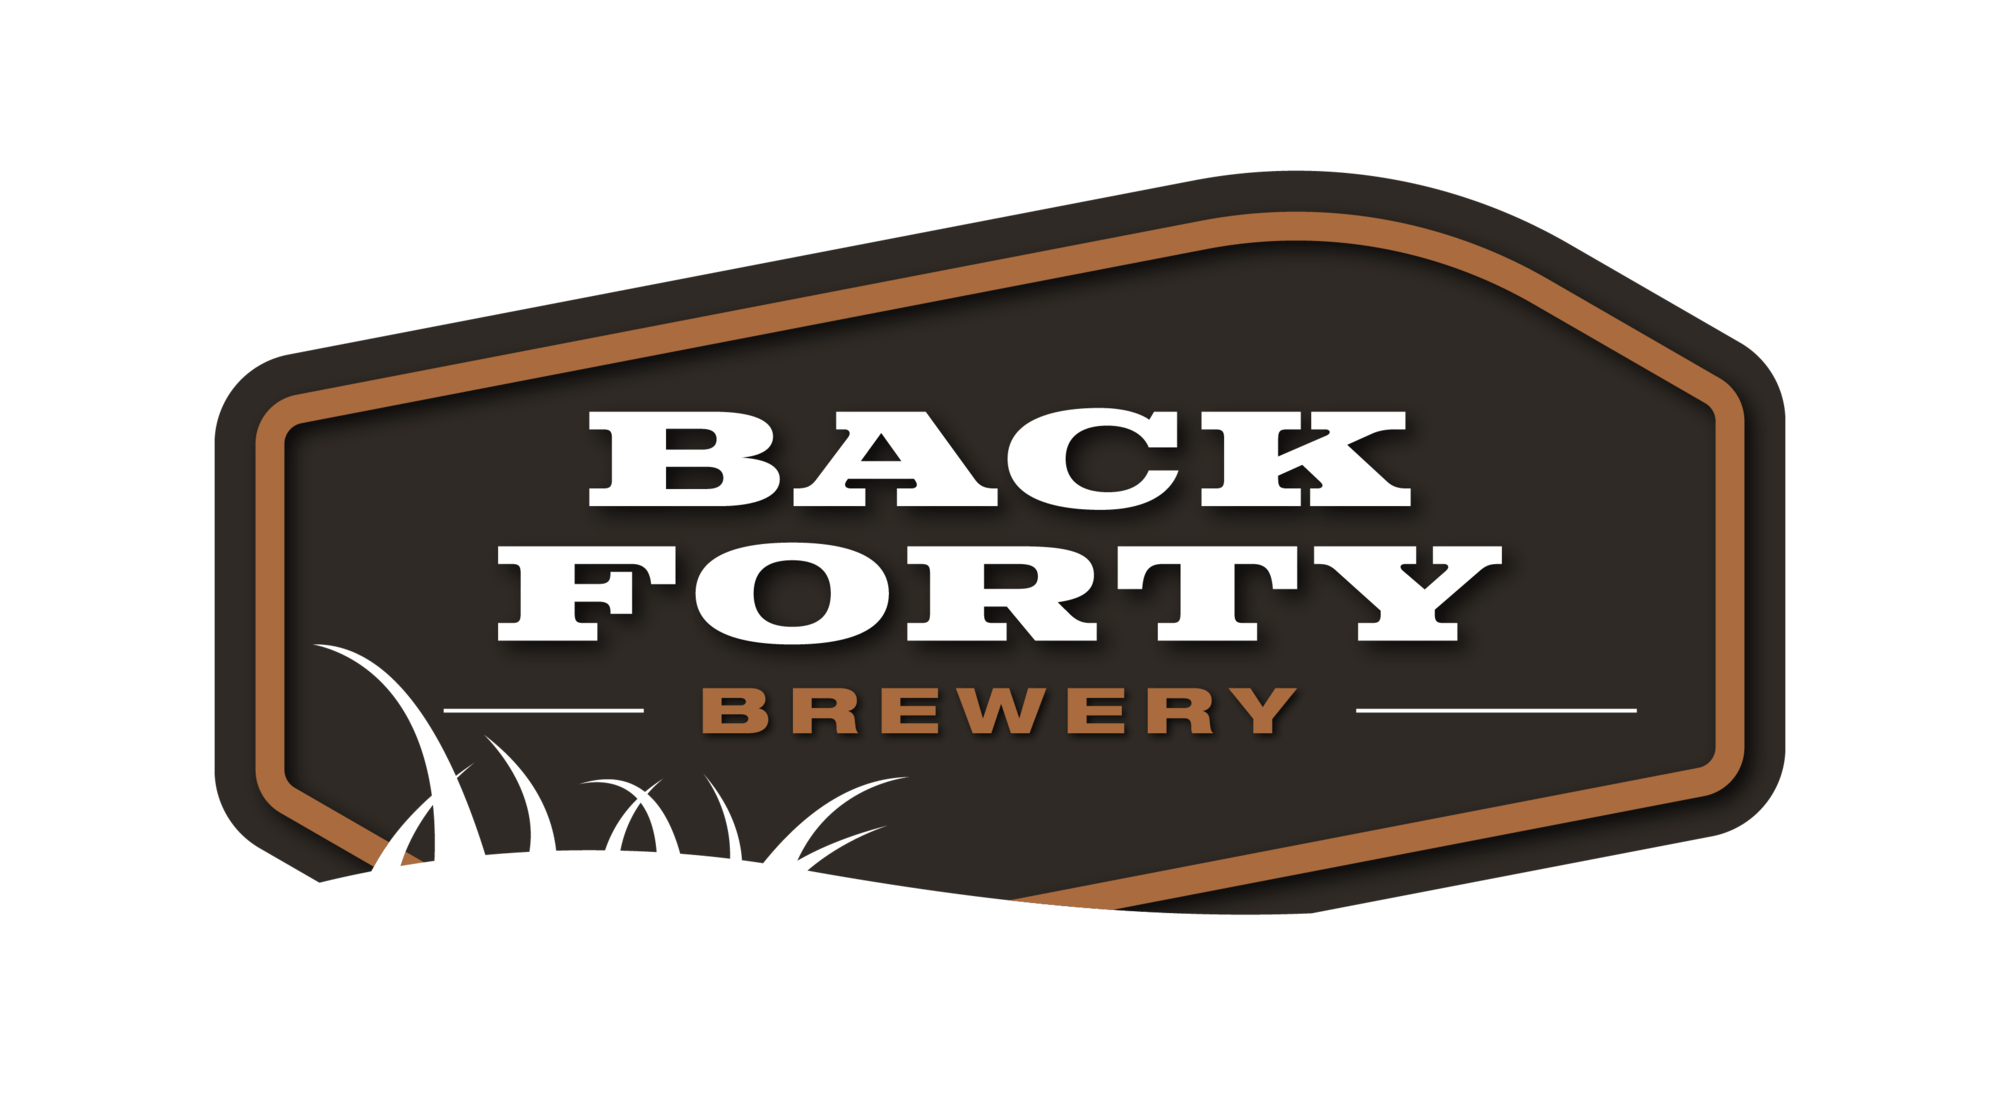 Back Forty Brewery company logo